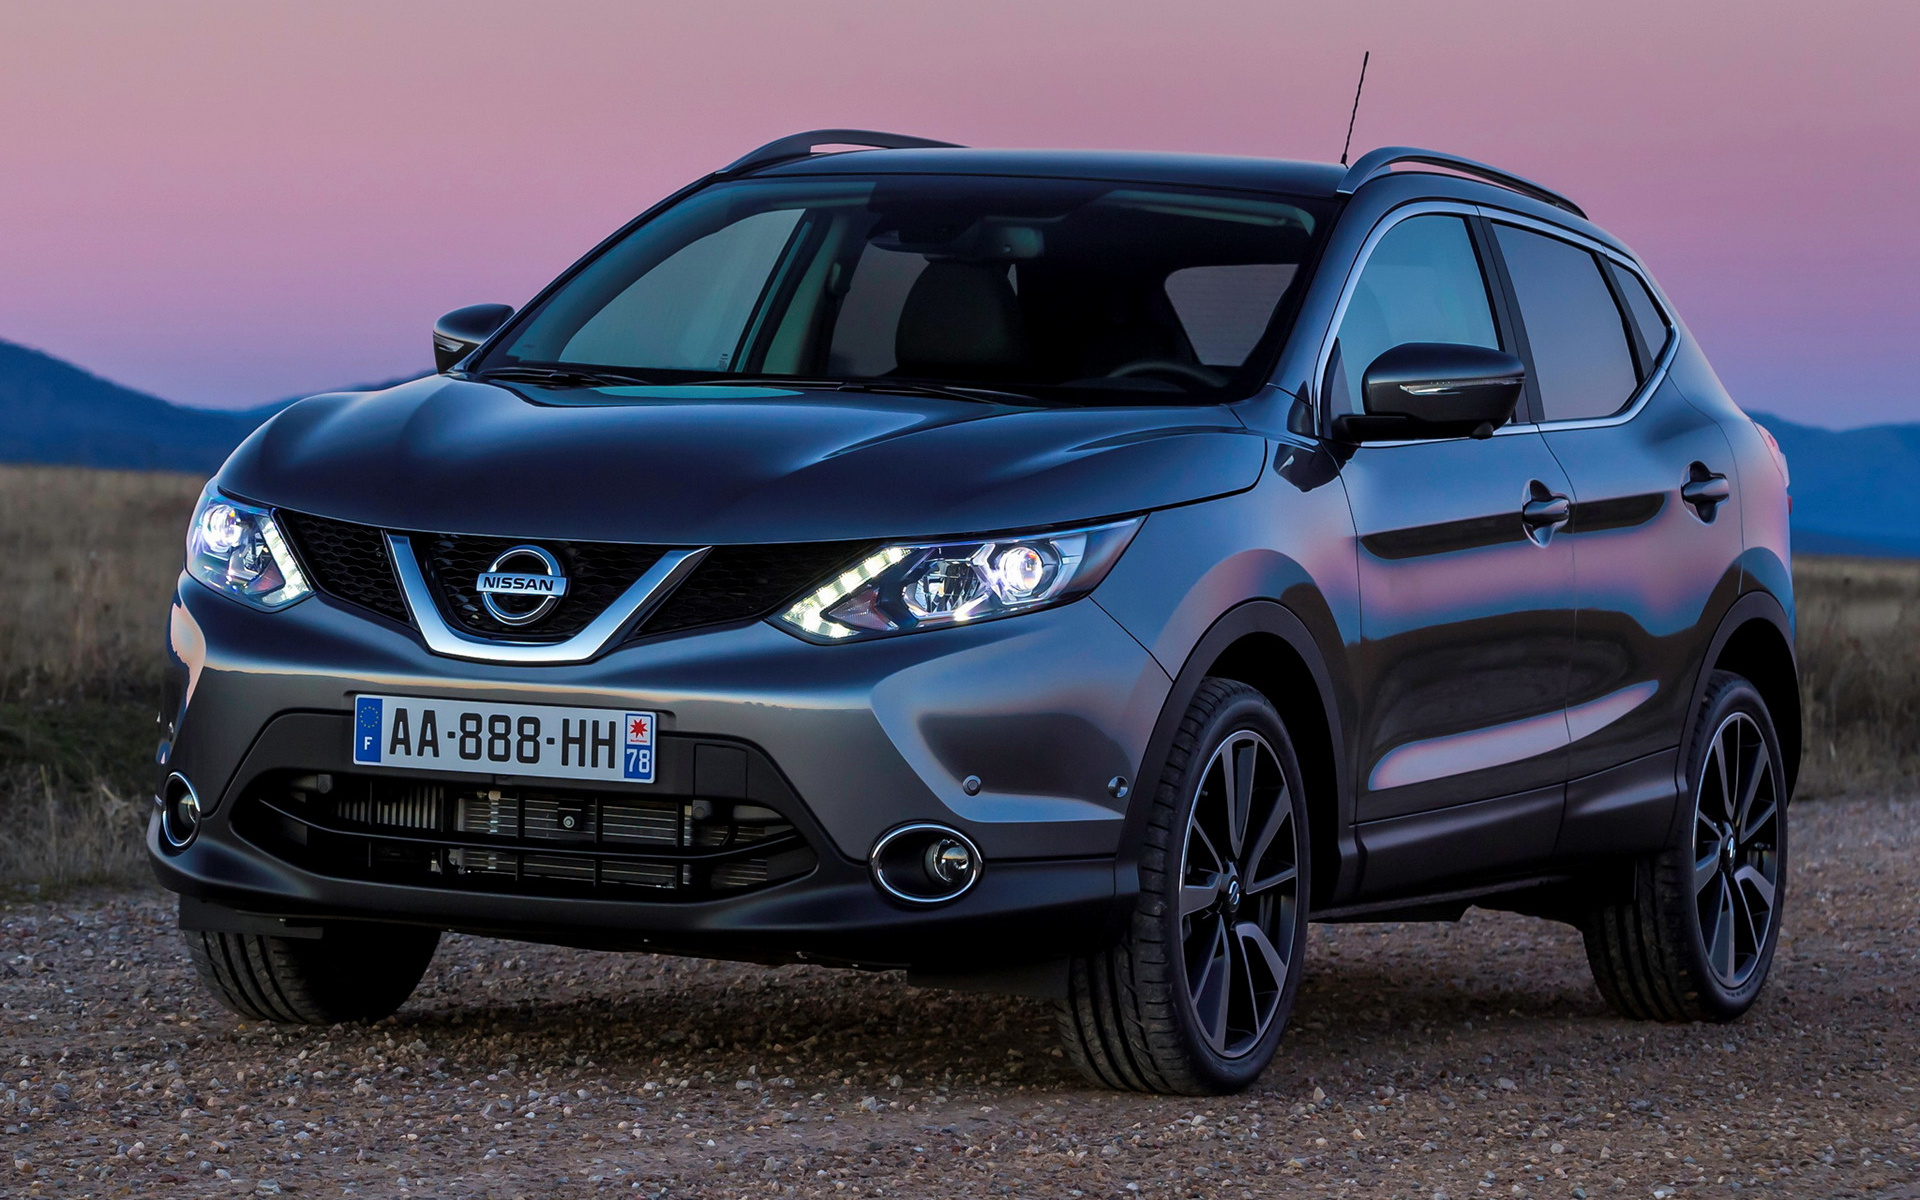 Nissan Qashqai (2014) Wallpapers and HD Images - Car Pixel